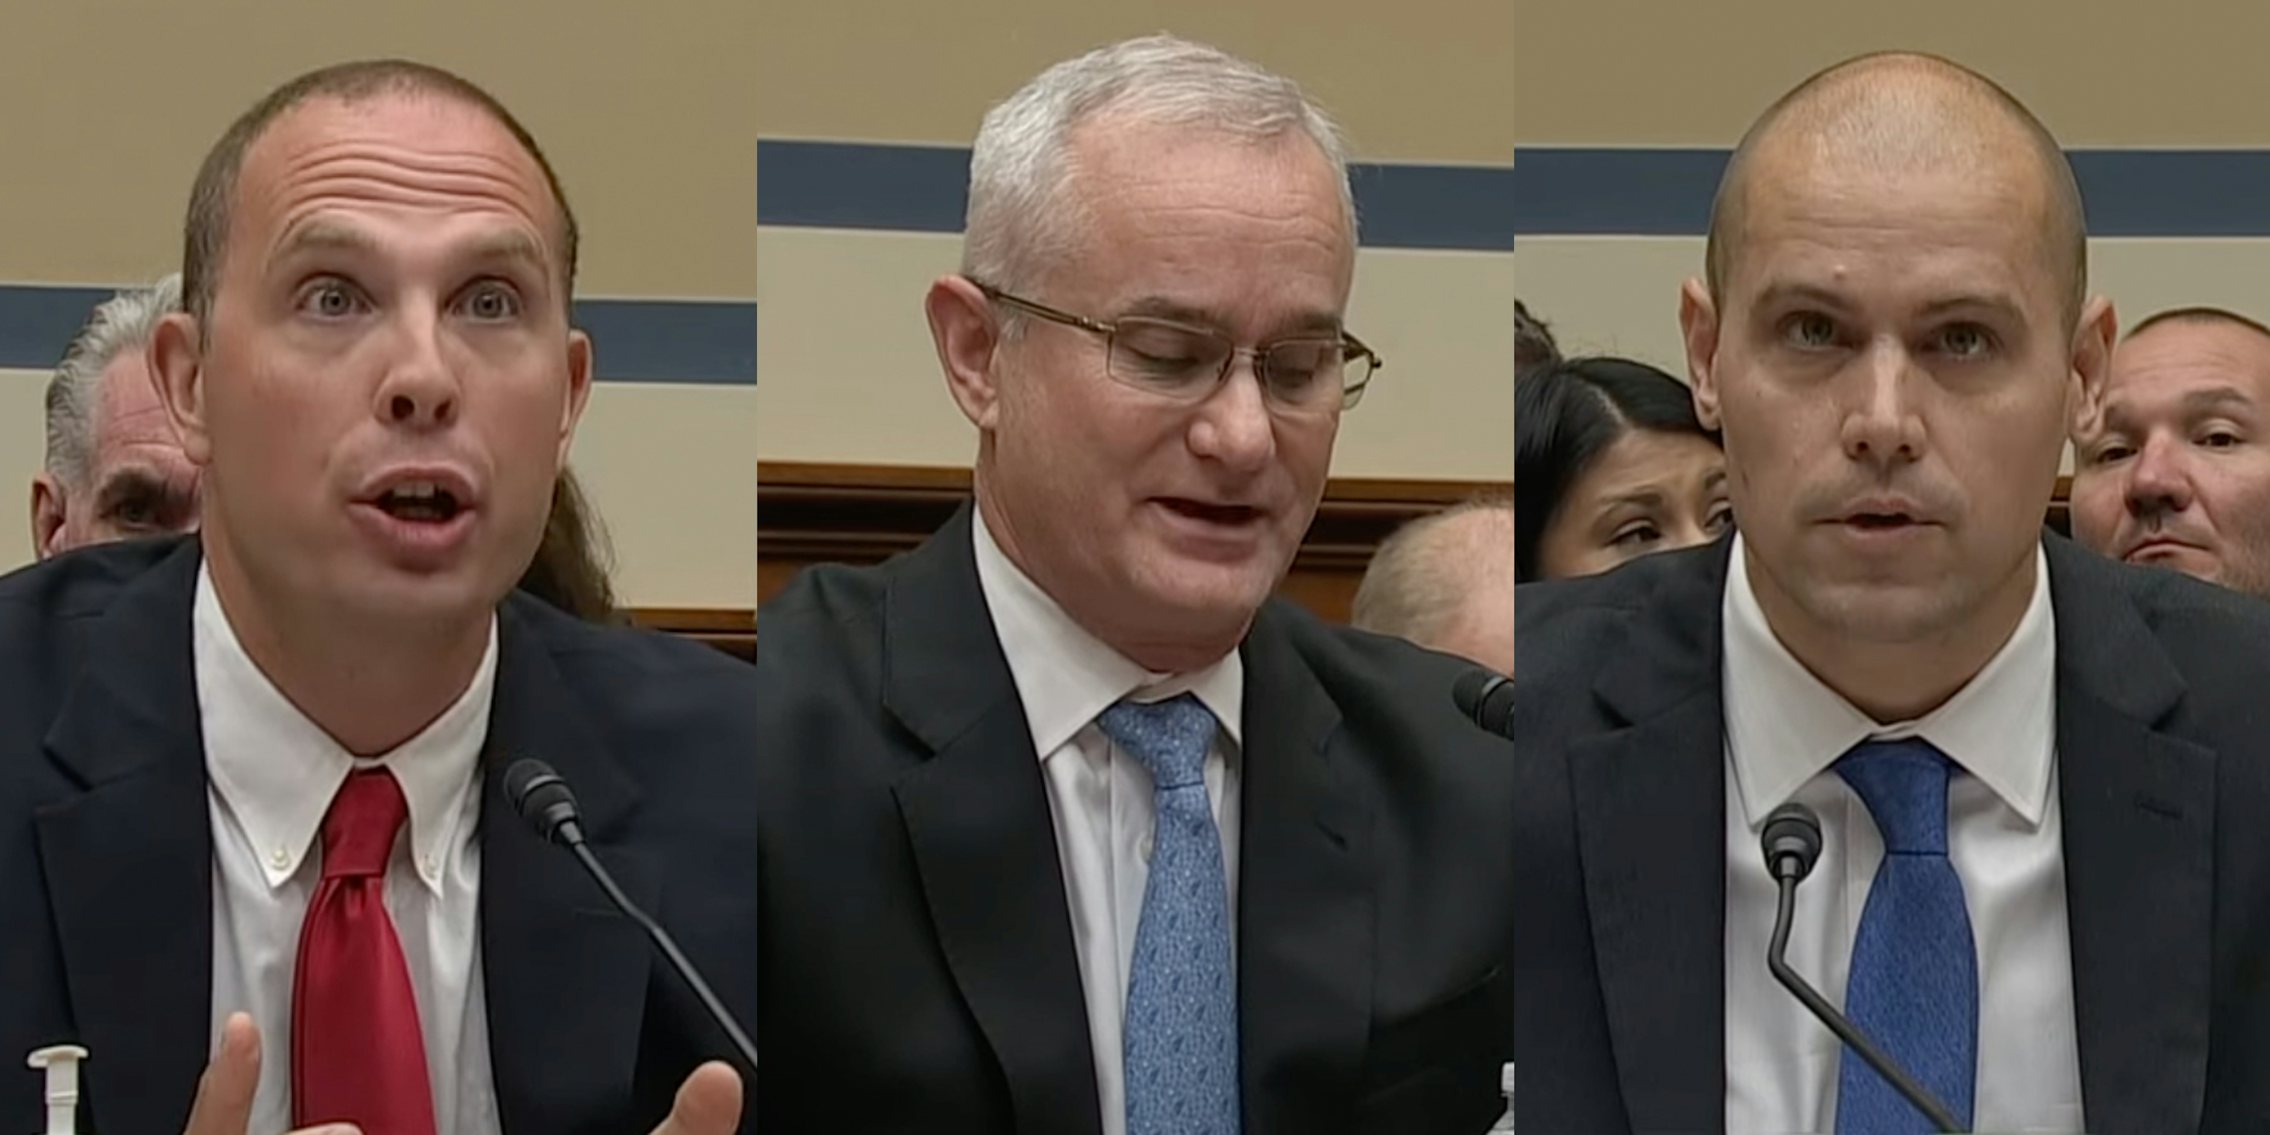 man in suit speaking into microphone at hearing (l) man in suit speaking into microphone at hearing (c) Ryan Graves speaking into microphone at hearing (r)